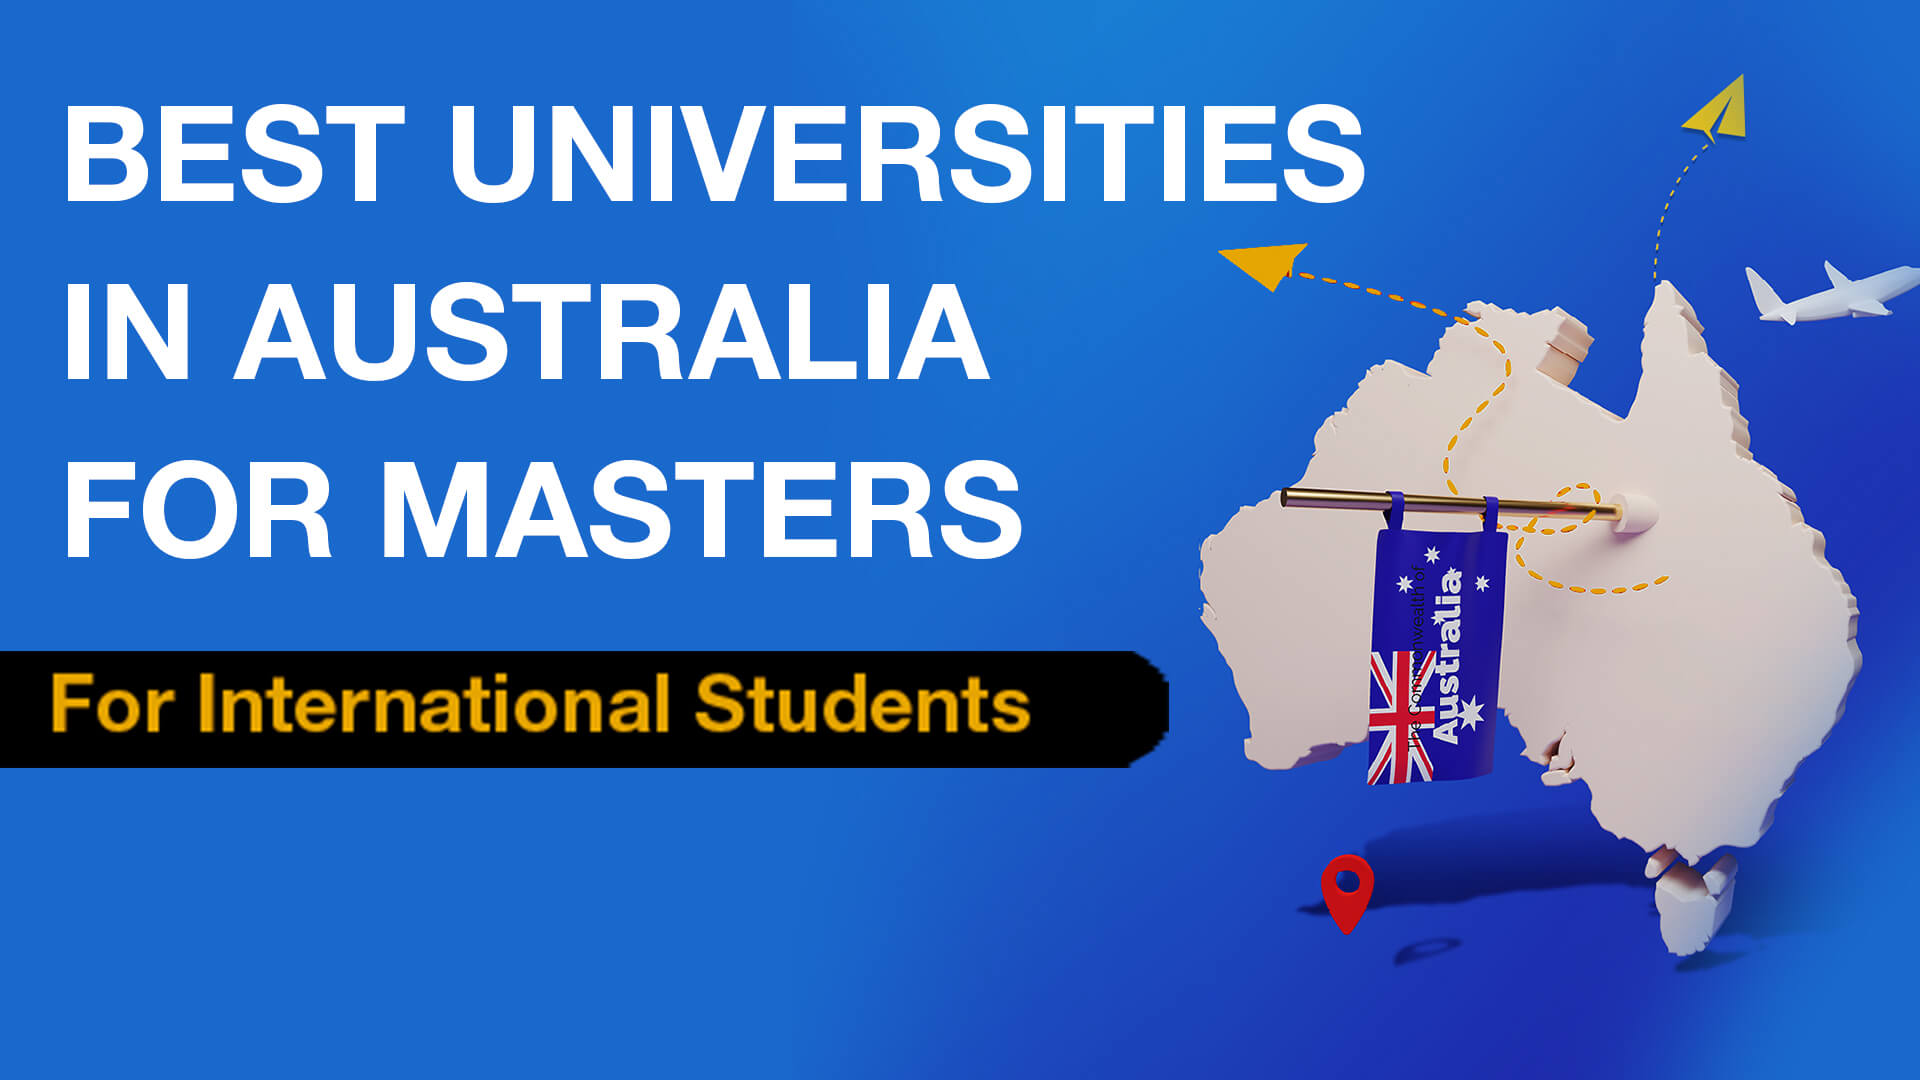 Best Universities in Australia for Masters for International Students